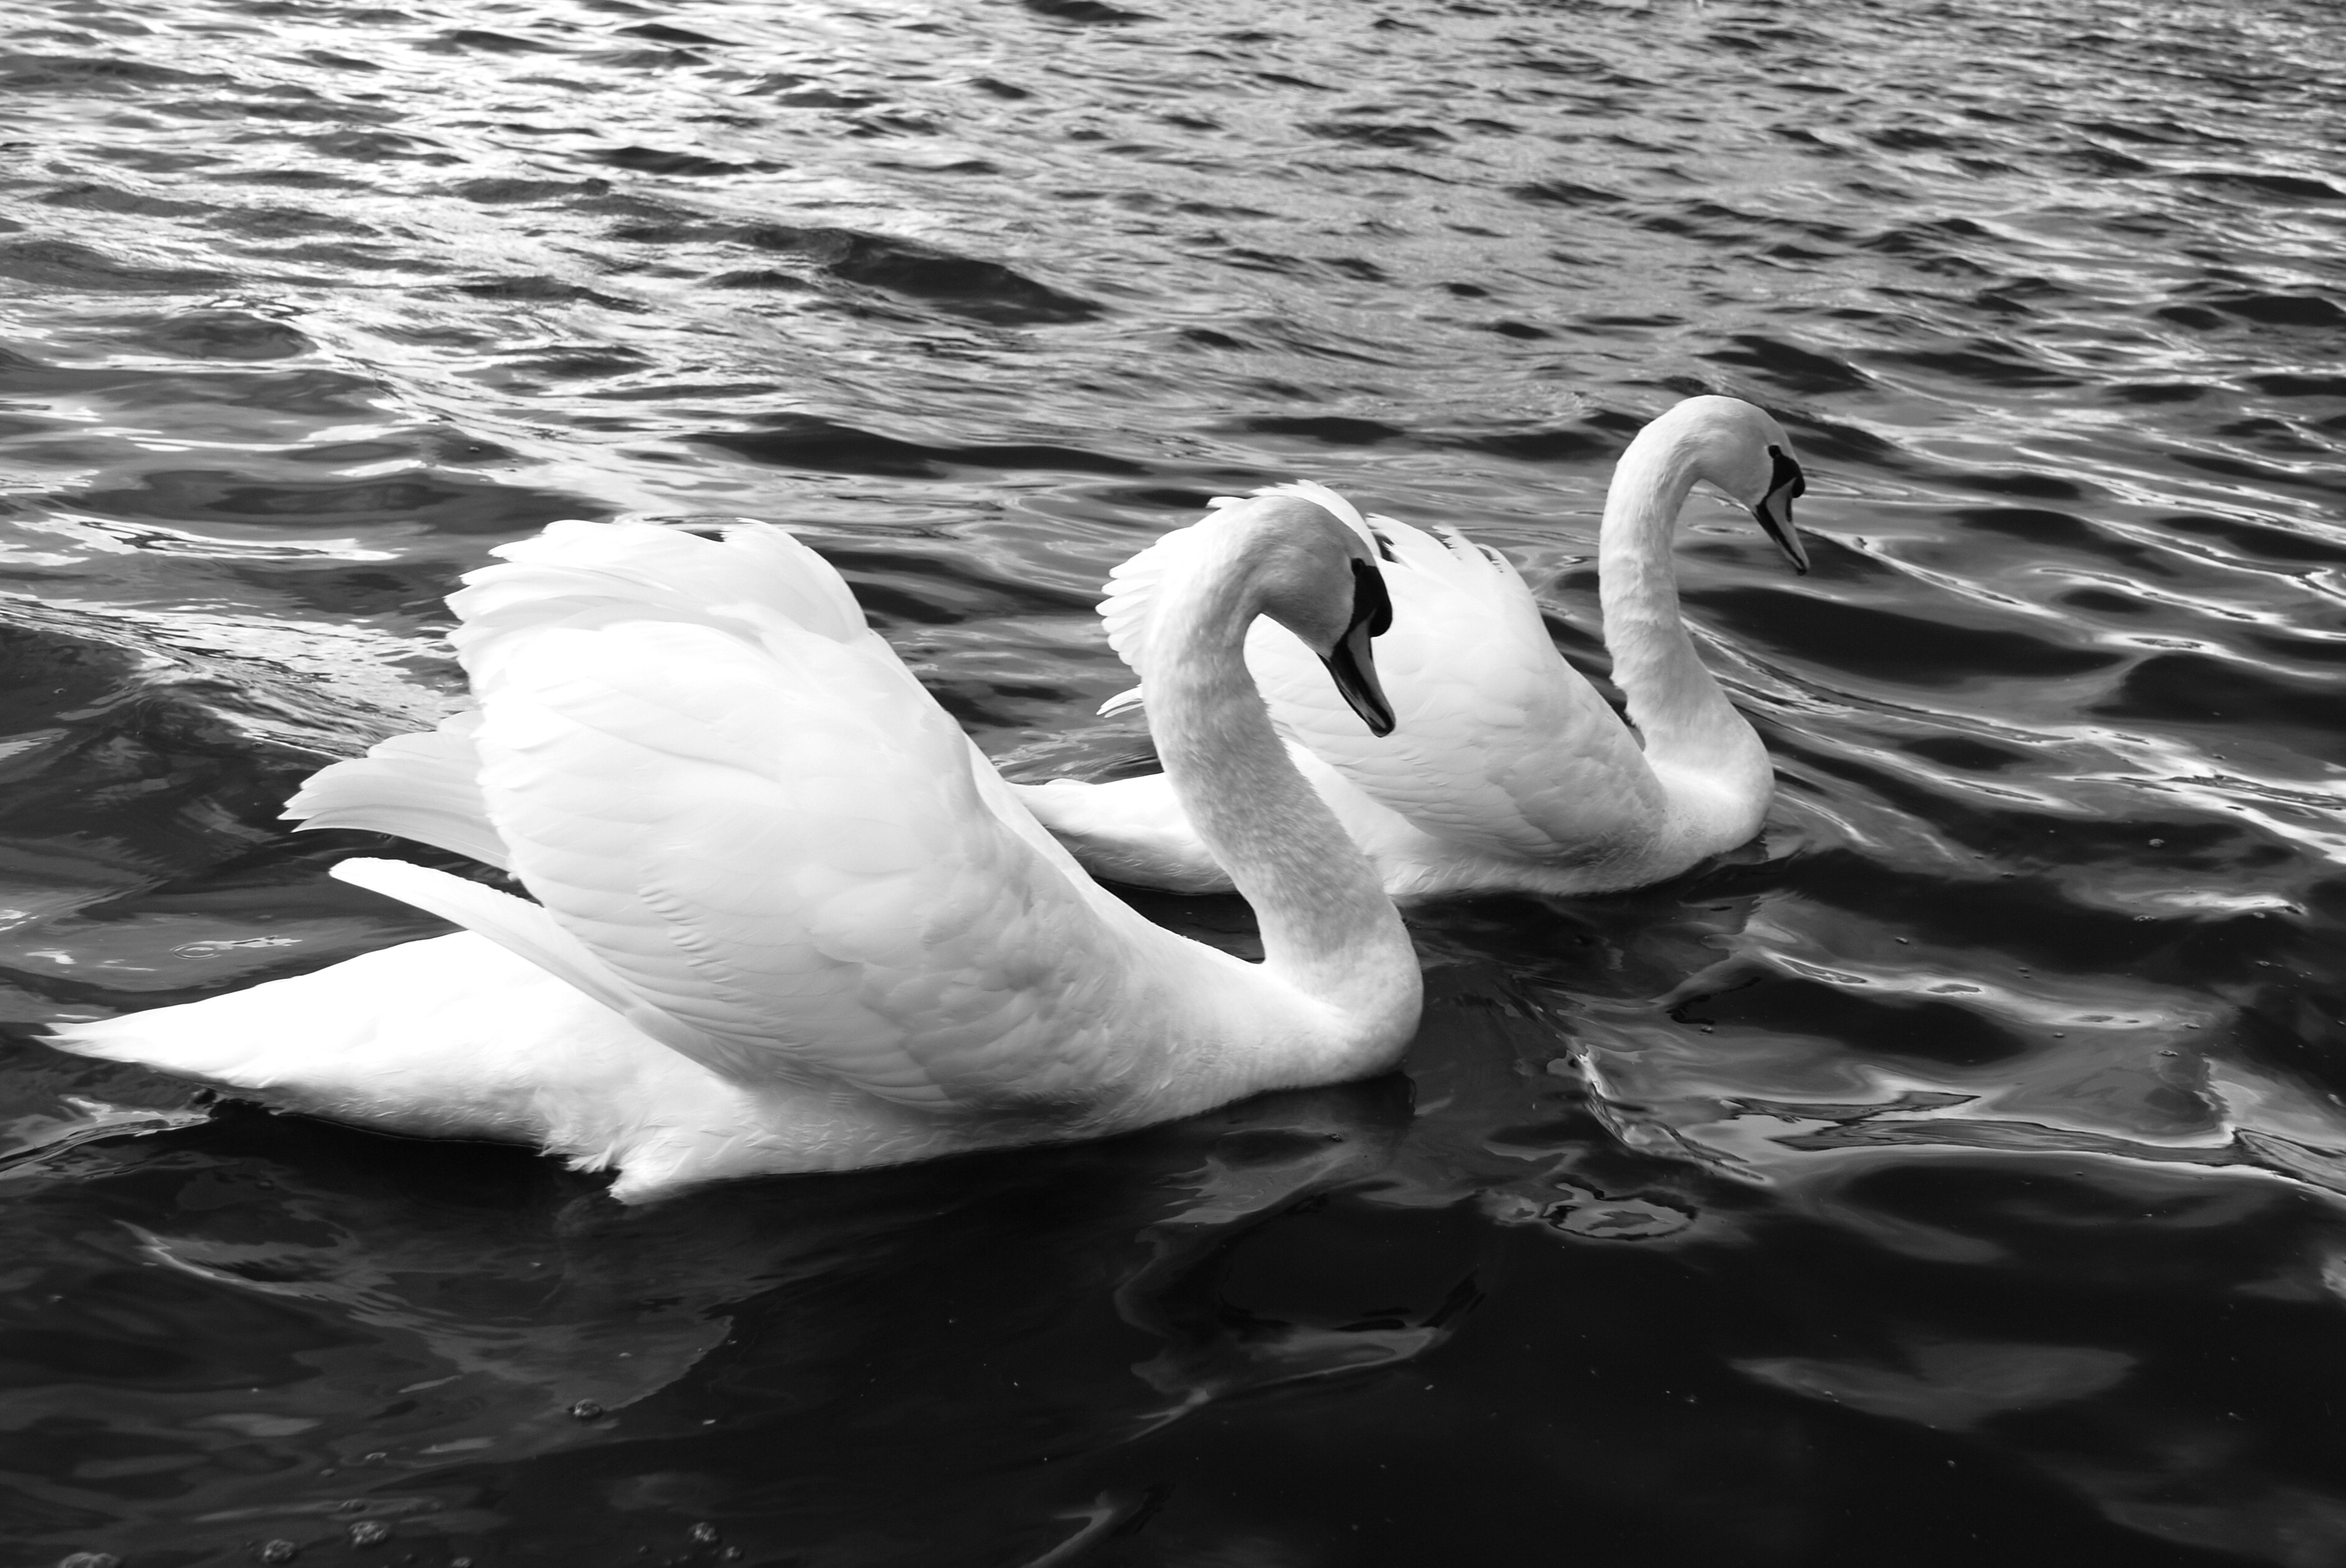 grayscale photography of swans swimming on body of water